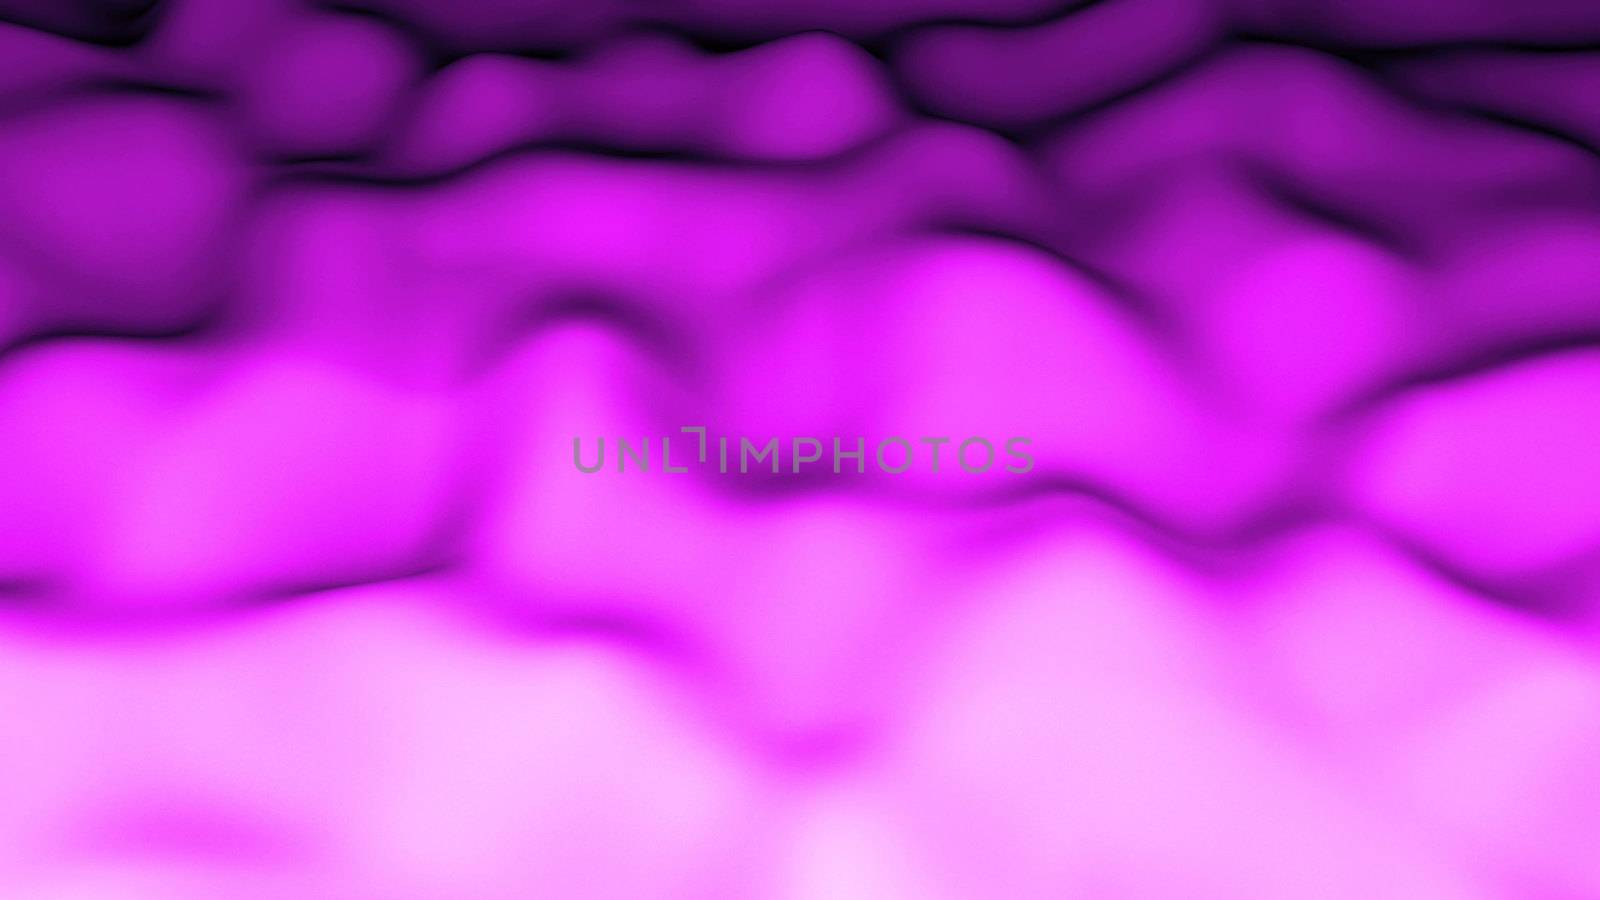 Abstract waves background. Digital illustration by nolimit046